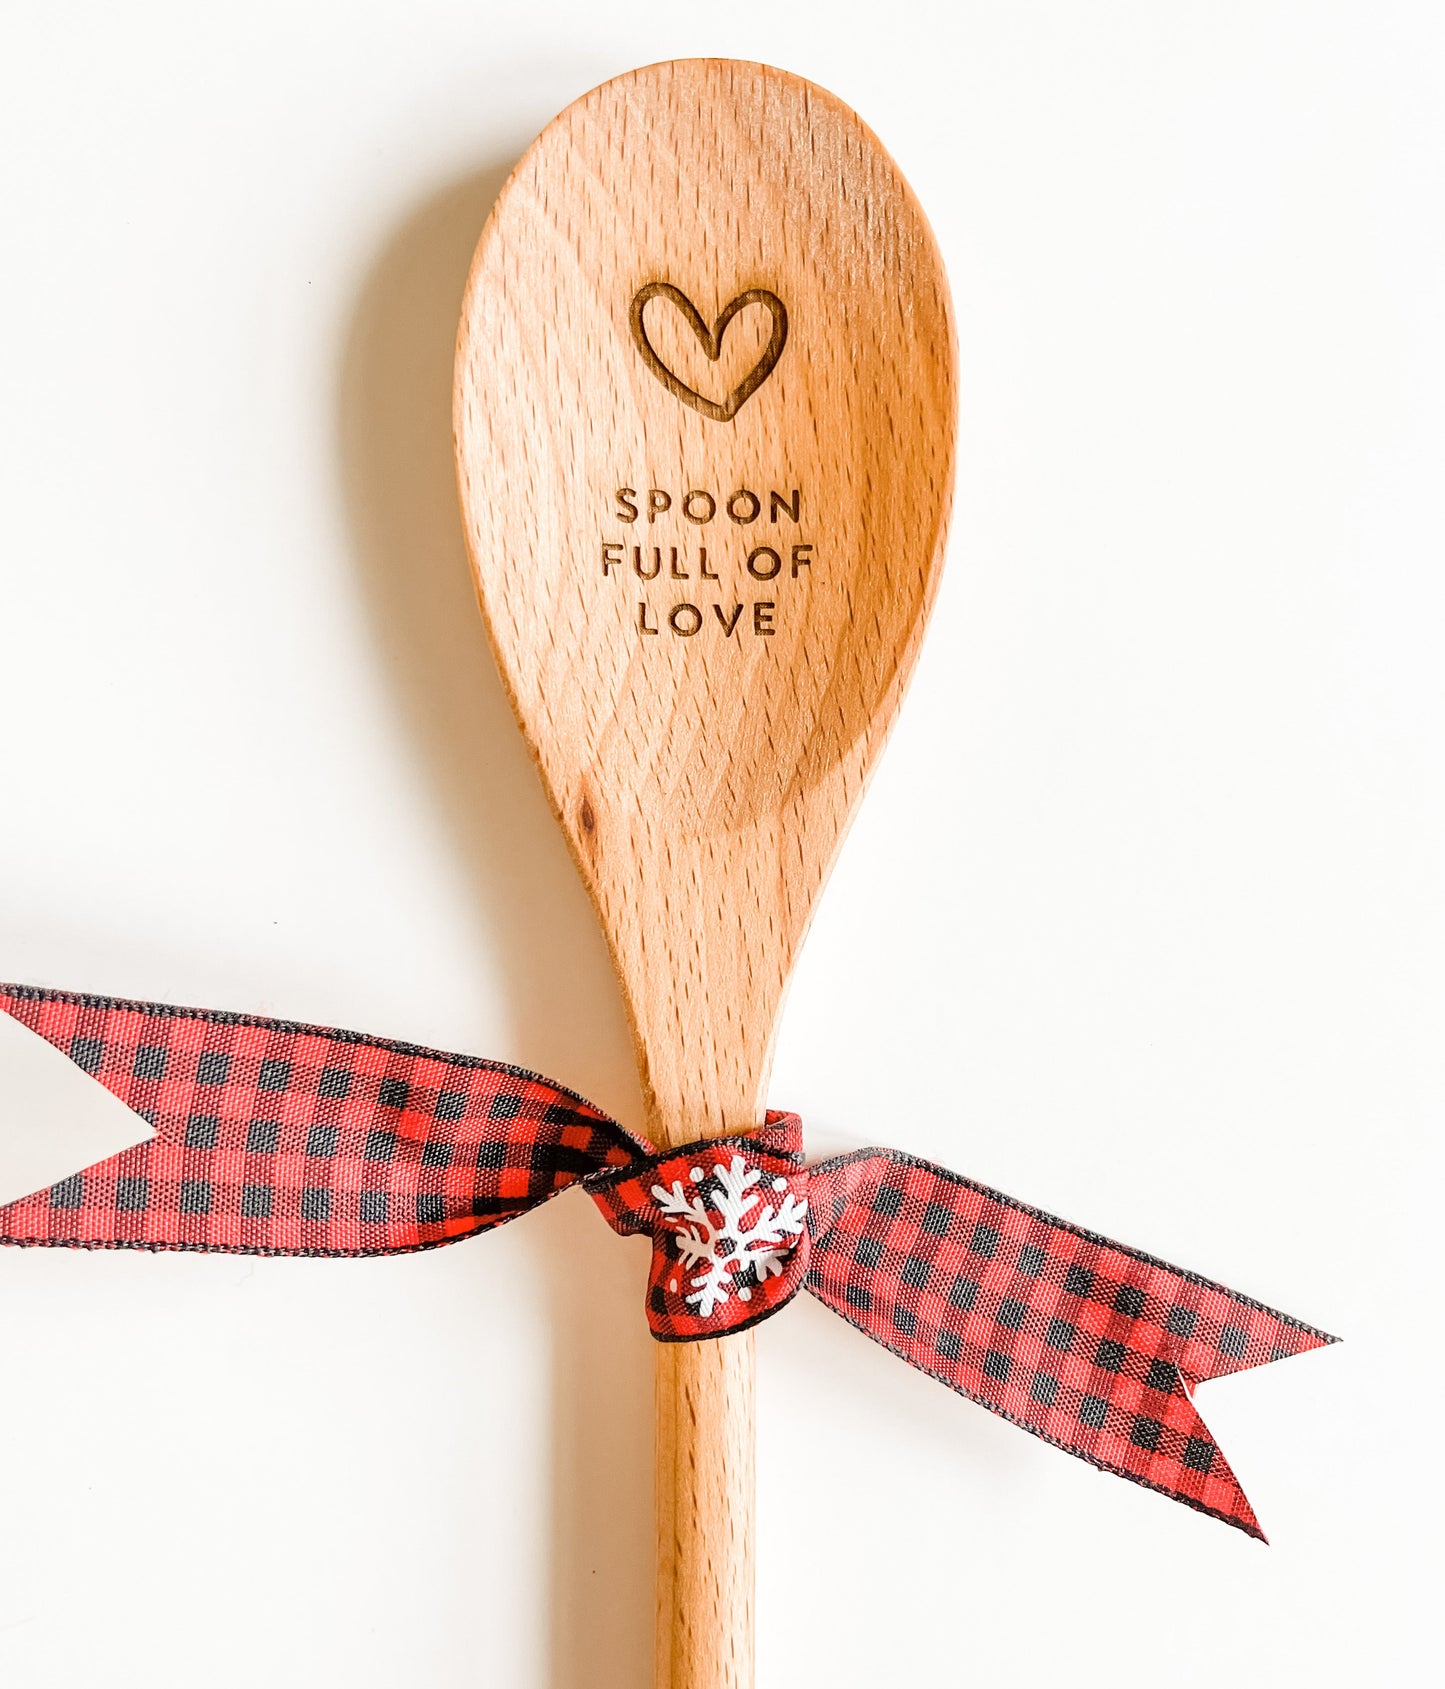 Christmas towel and Wooden Spoon set